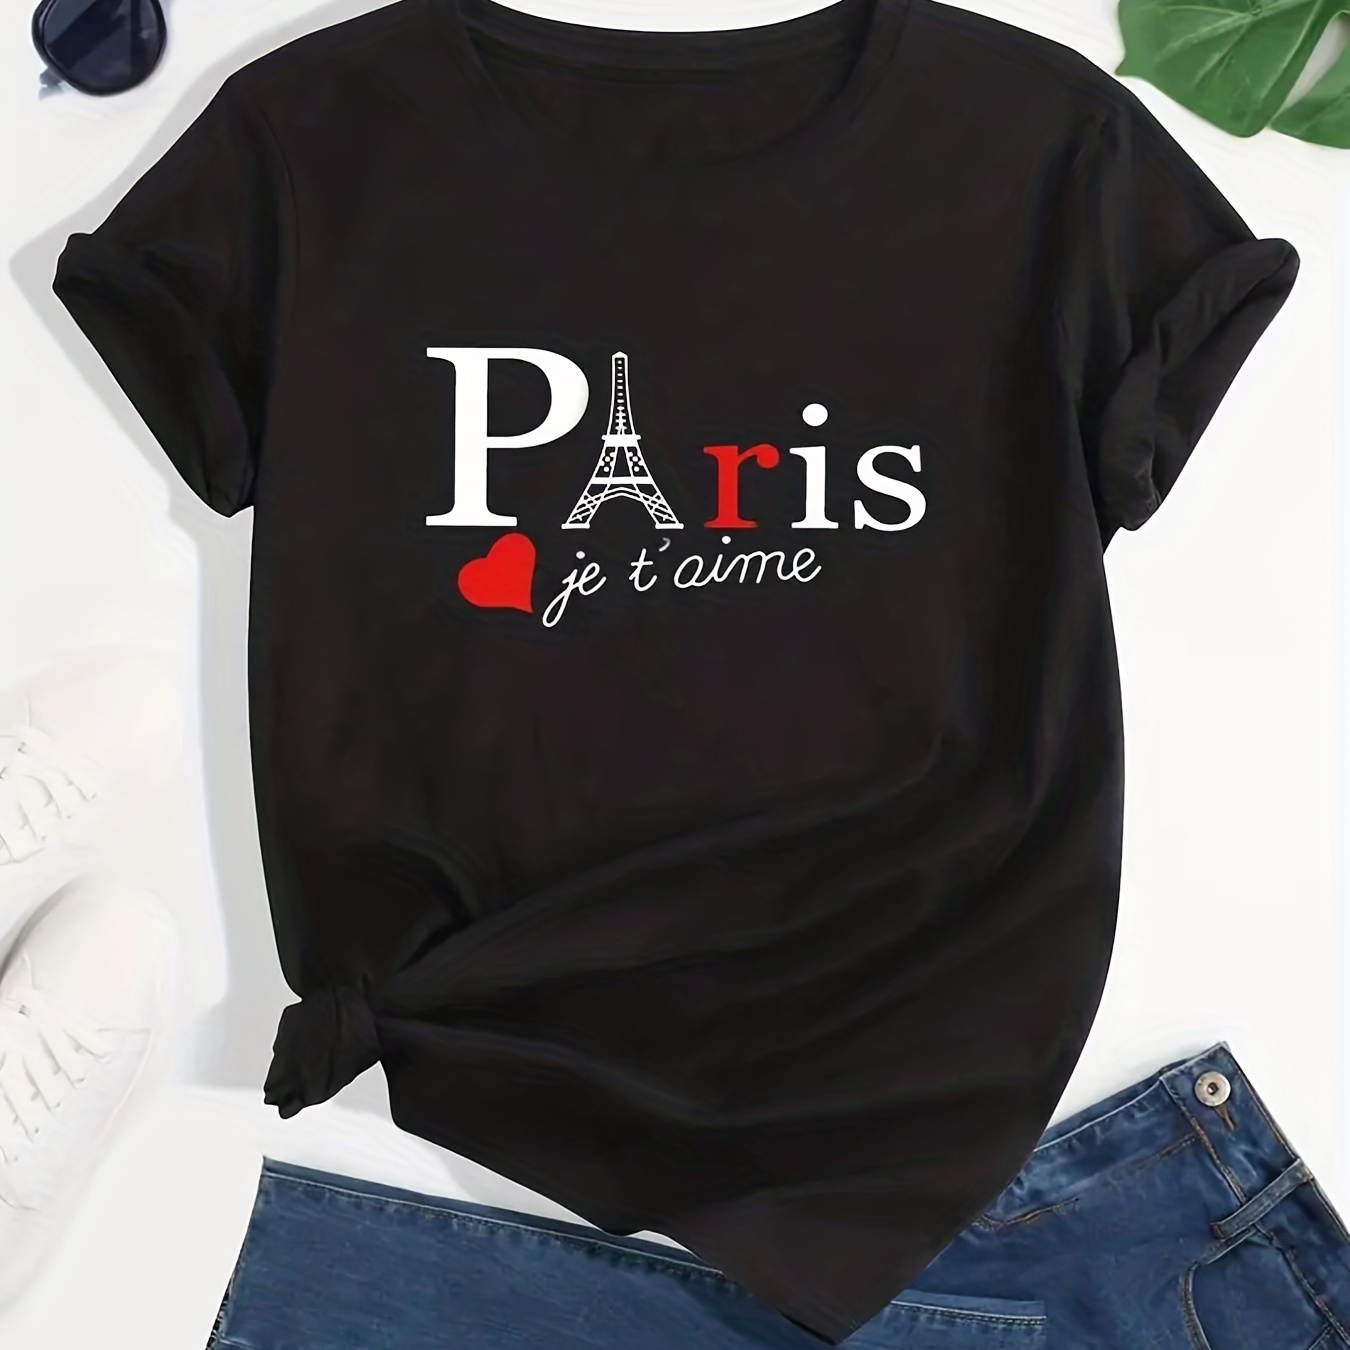 

Eiffel Tower & Letter Print T-shirt, Casual Crew Neck Short Sleeve T-shirt For Spring & Summer, Women's Clothing